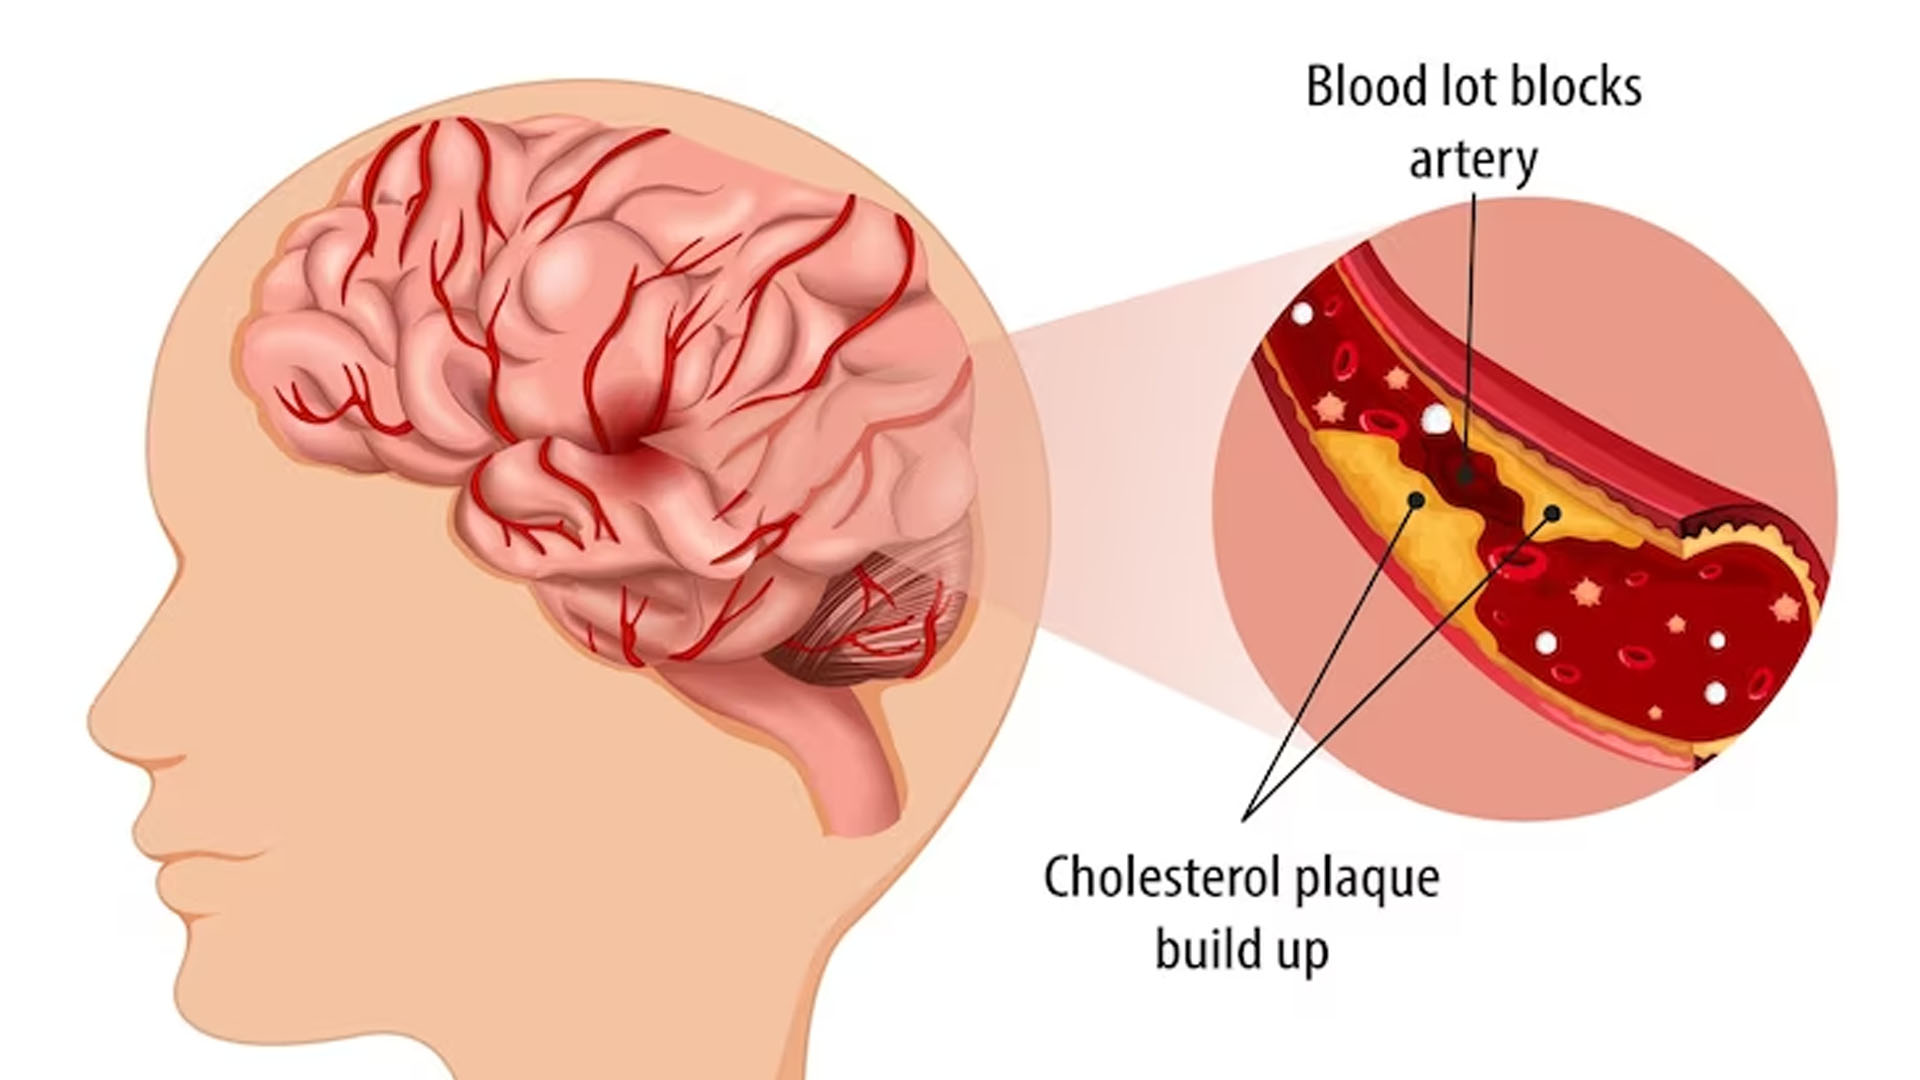 What are the Symptoms of Blood Clot in Brain?